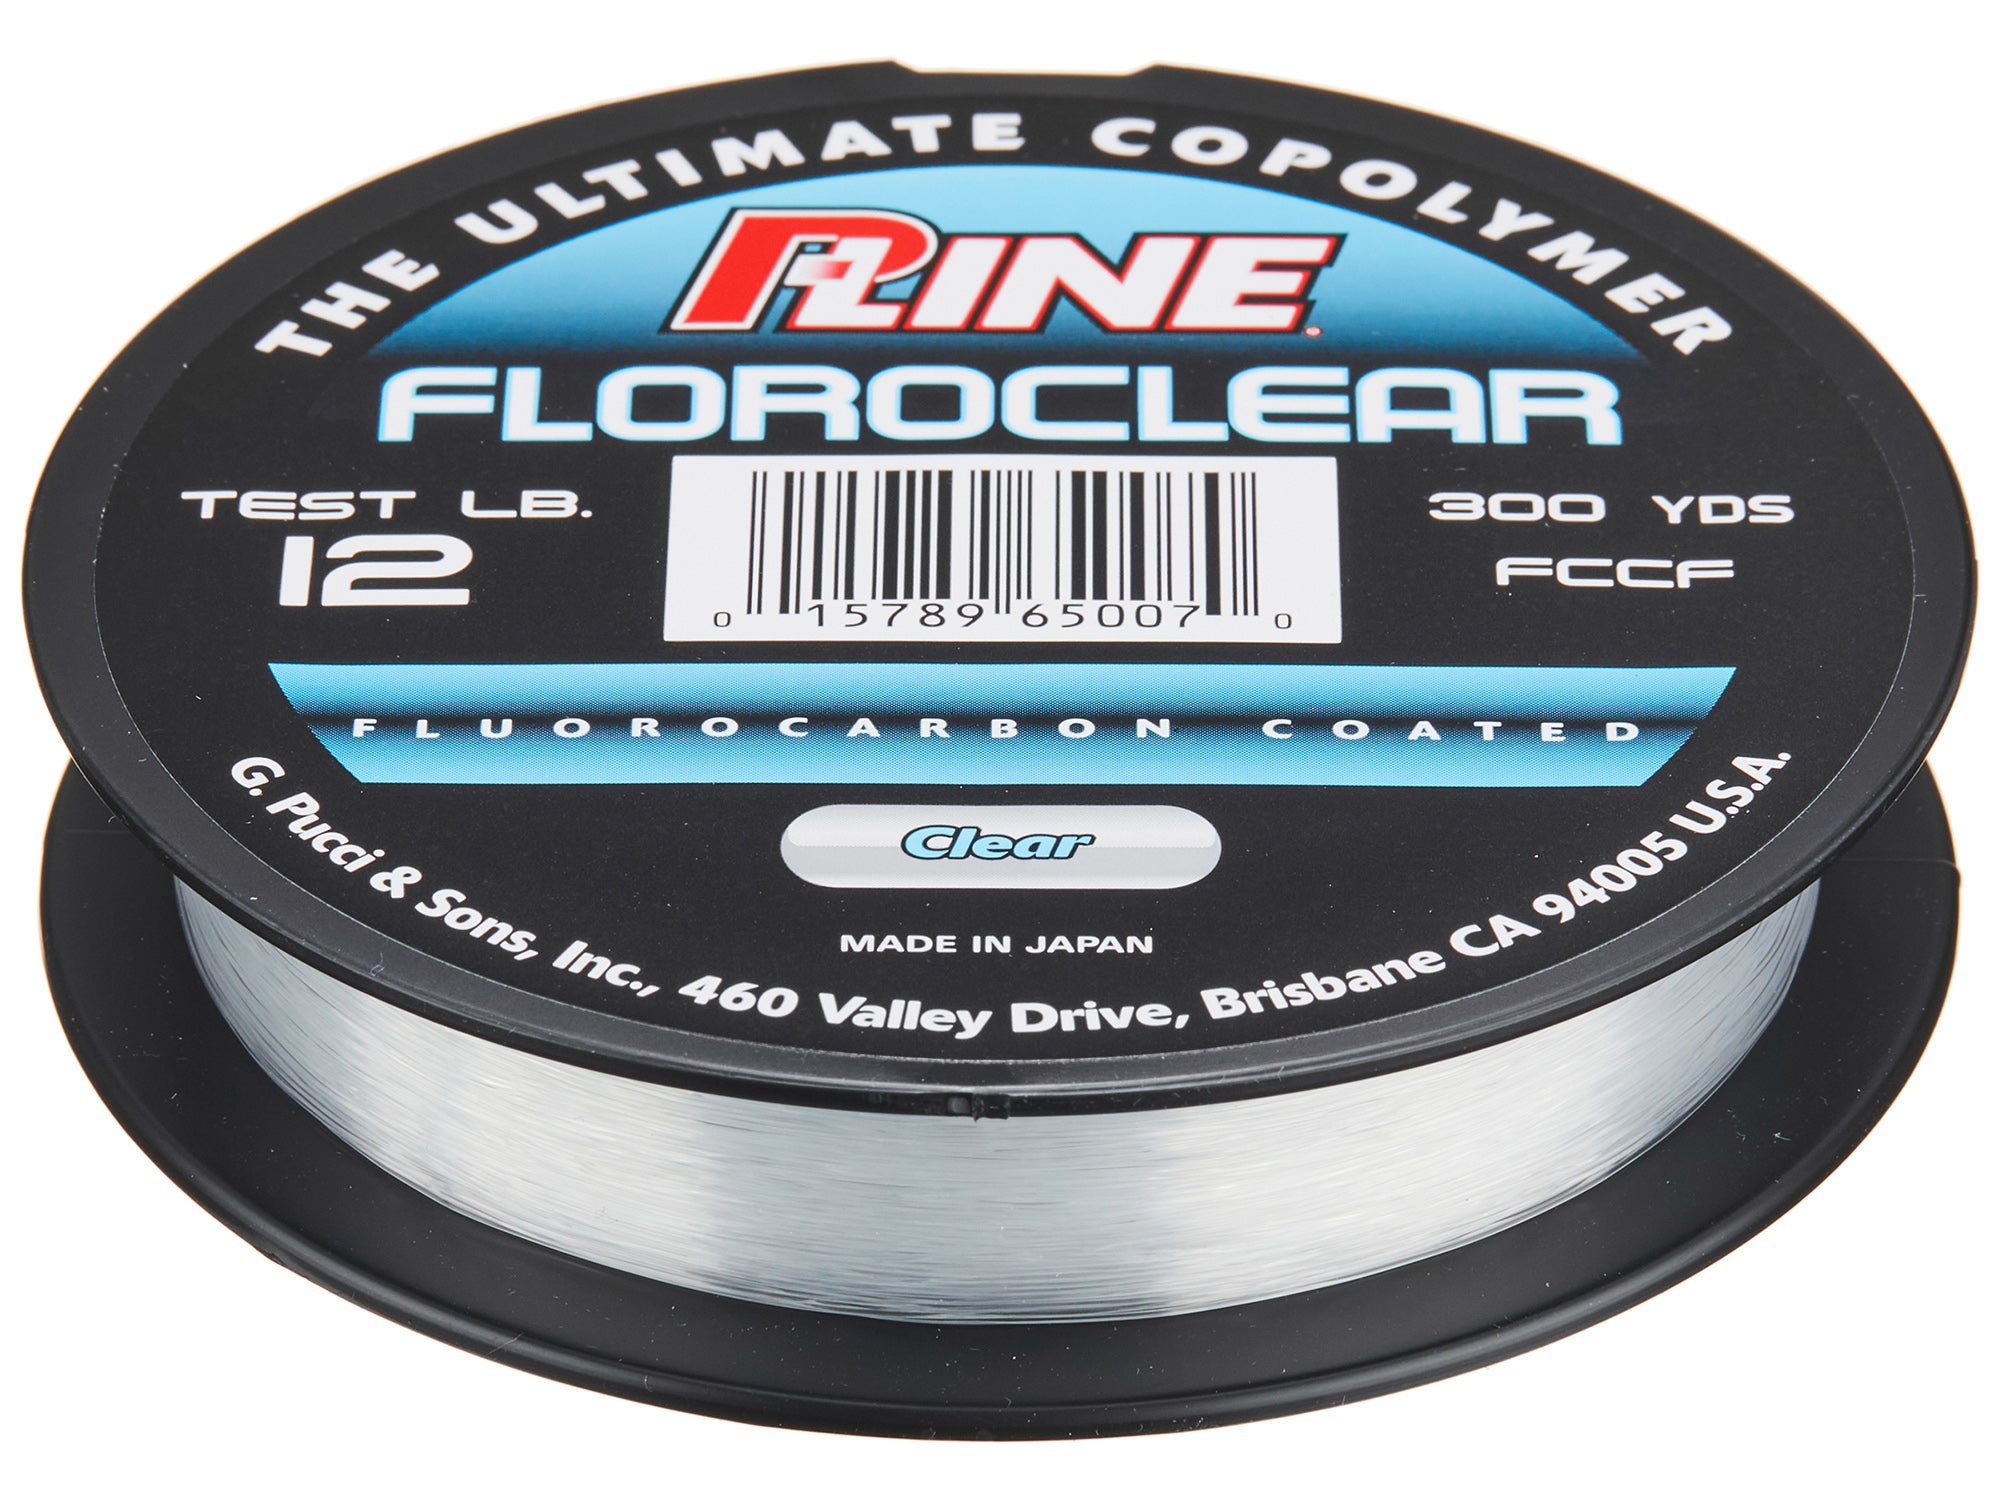 Pick P-Line Floroclear Fluorocarbon Coated Copolymer Fishing Line Clear 300yd 